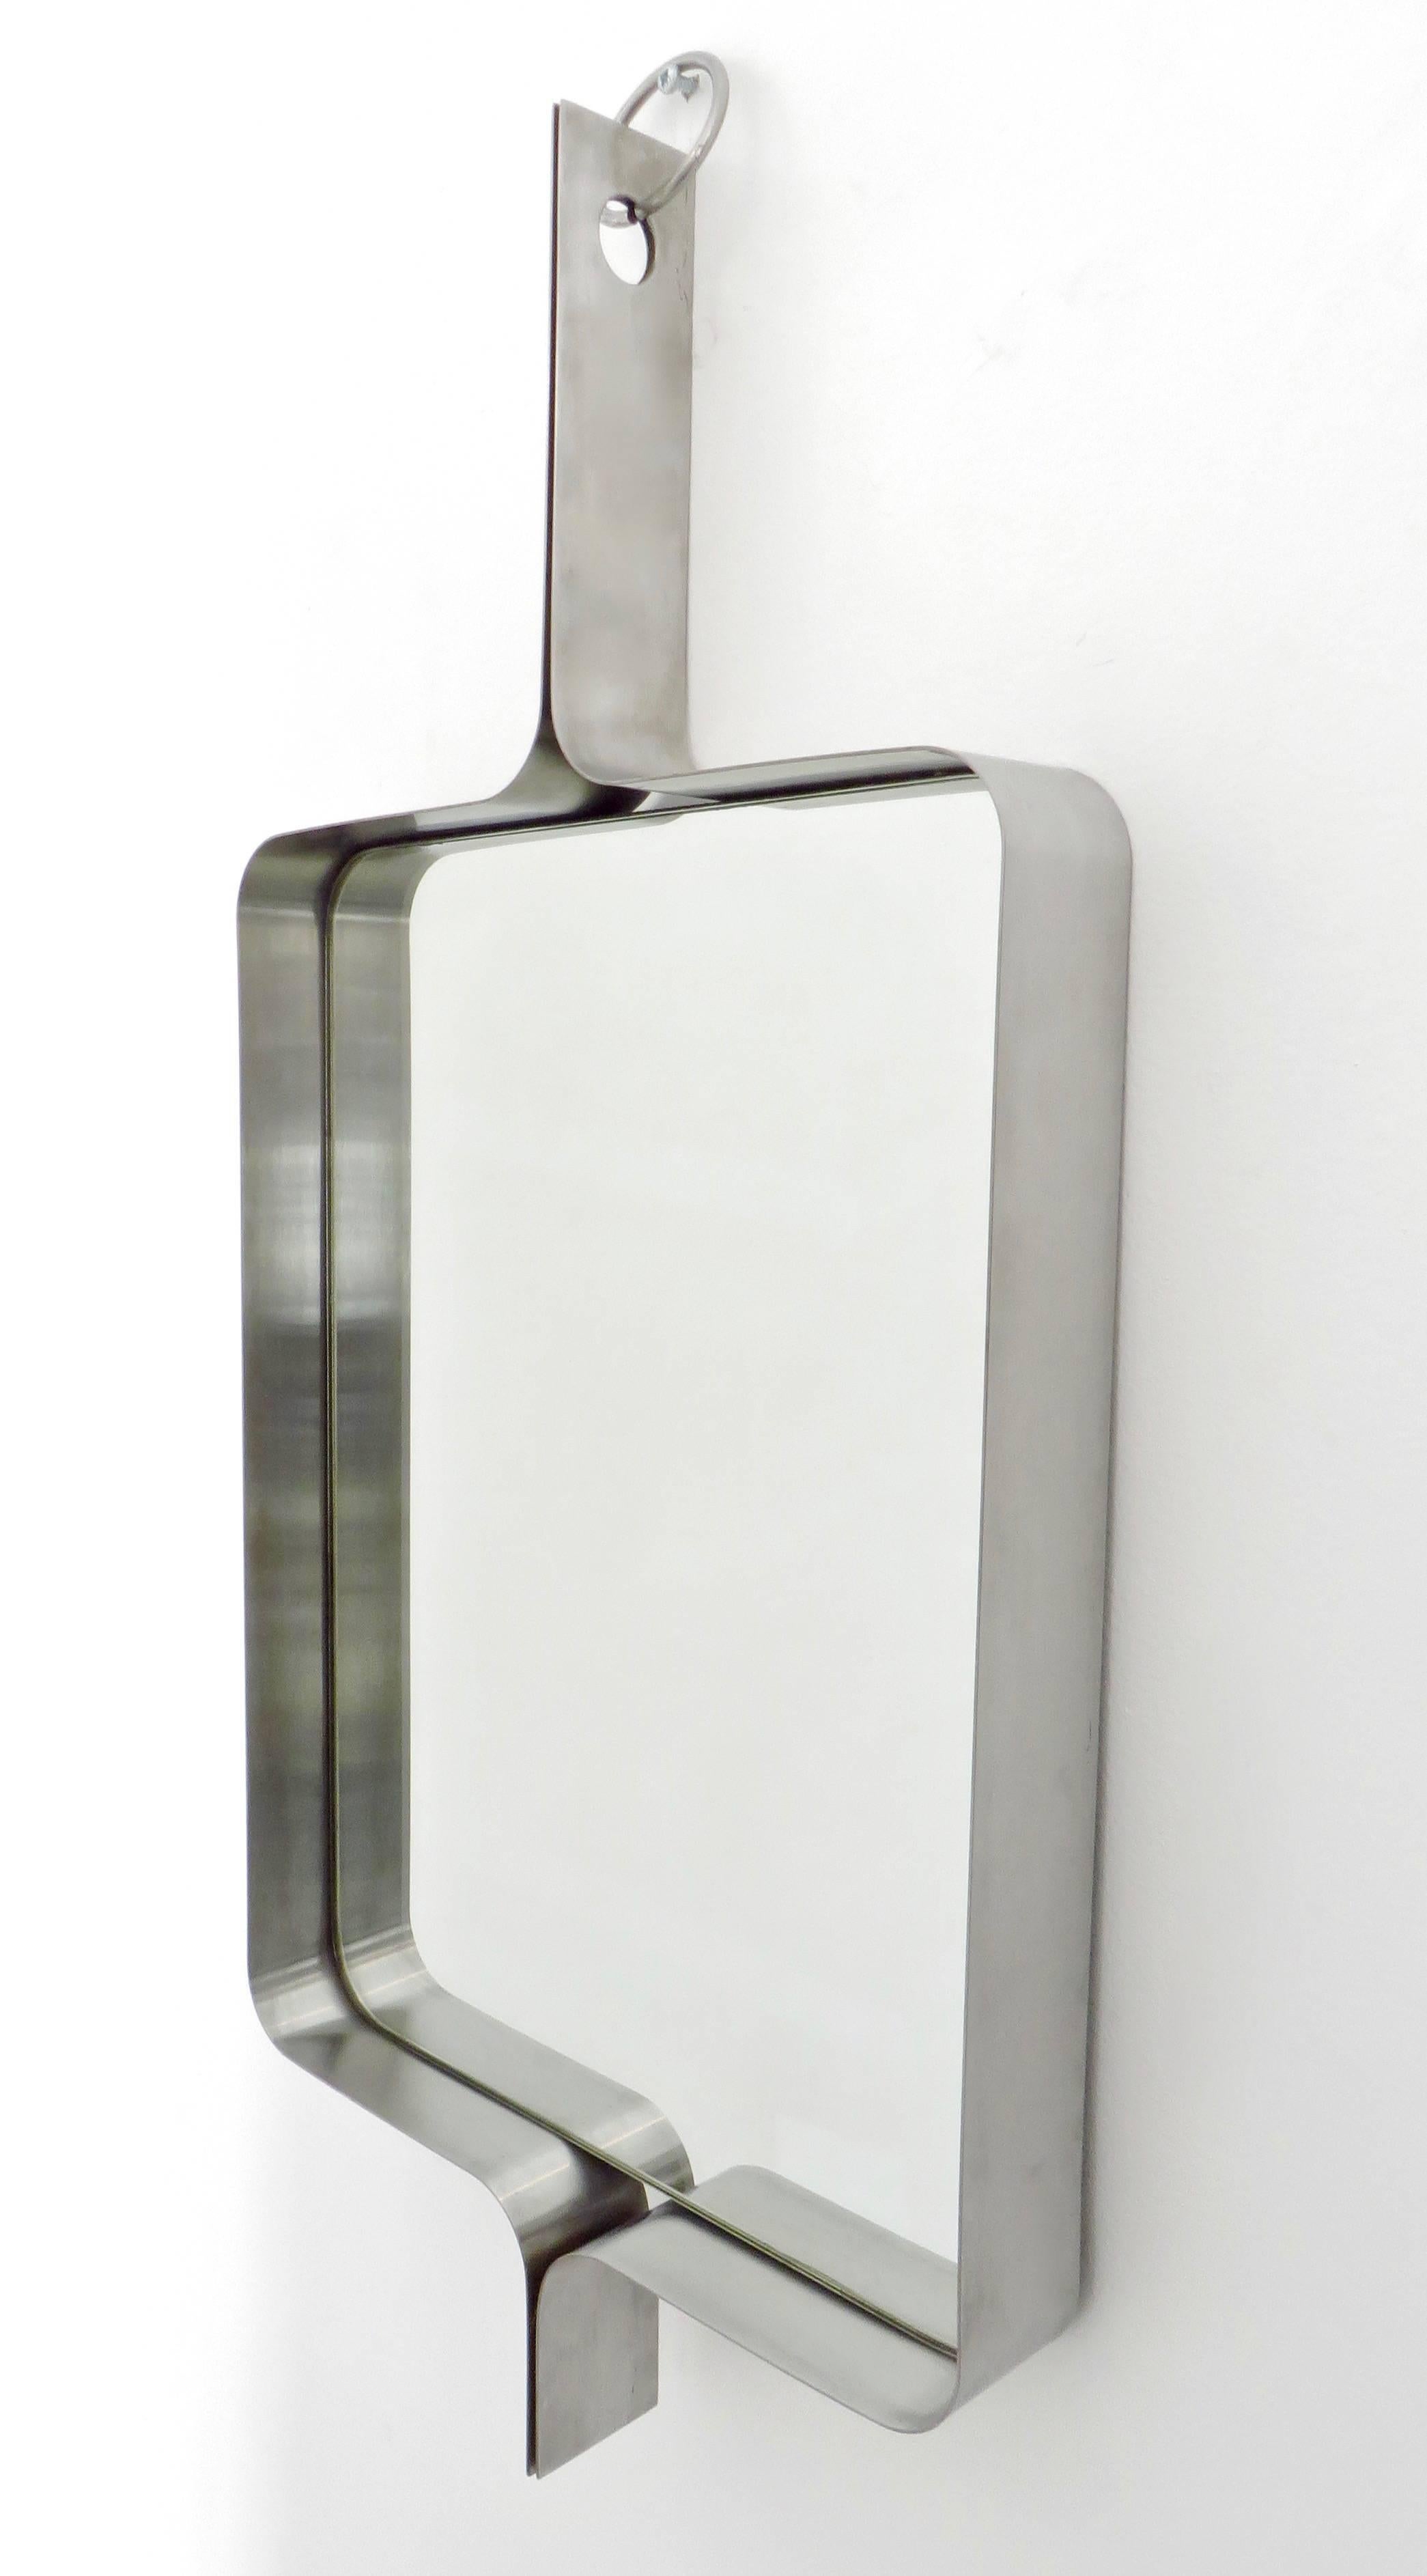 A Xavier-Feal French rectangular brushed stainless steel wall mirror, circa 1970.
Produced by Inox Industrie, circa 1970.
This mirror was previously attributed to Michel Boyer.
A pair available.
Will separate. Price listed is per mirror. 
Excellent